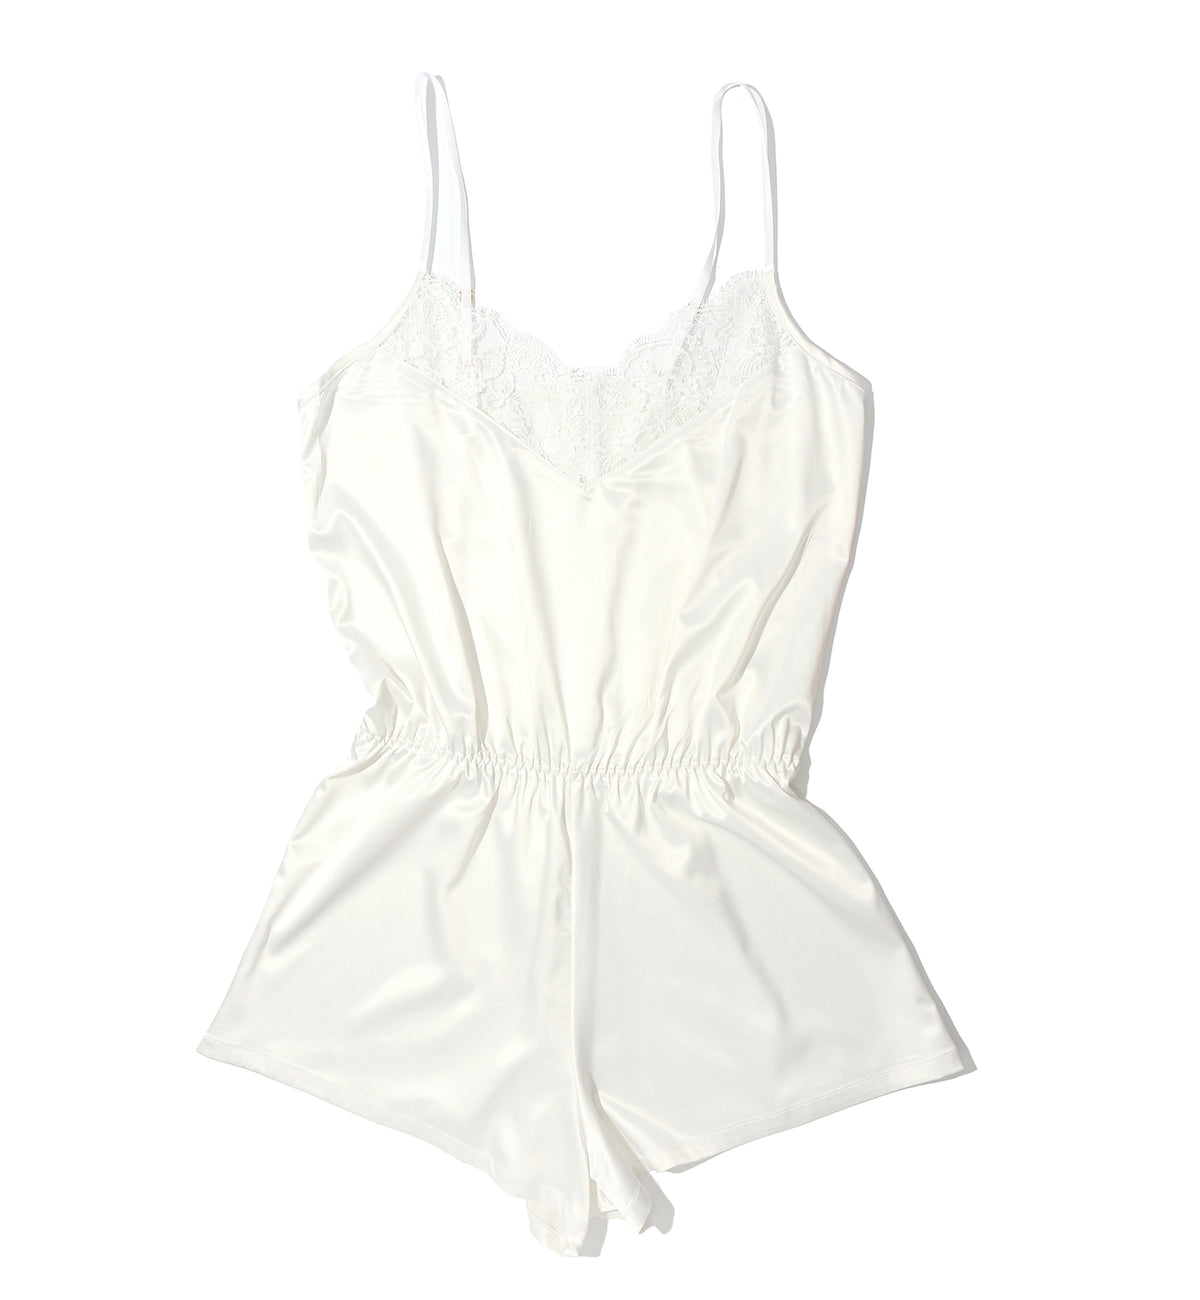 Hanky Panky Bridal Happily Ever After Romper (4R8631),XS,Light Ivory - Light Ivory,XS